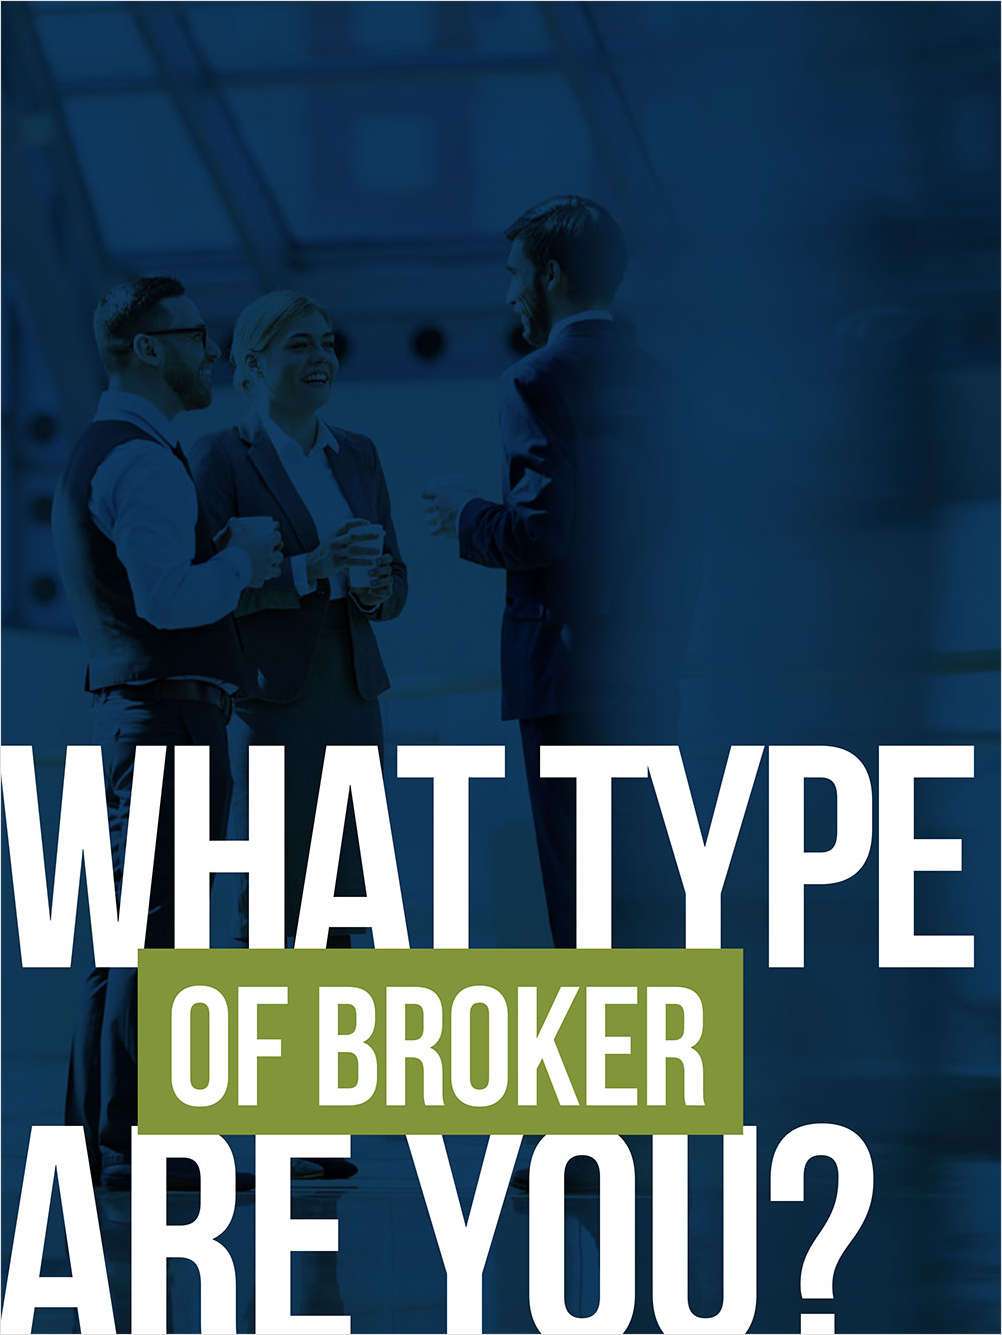 What Type of Broker Are You? Take the Quiz